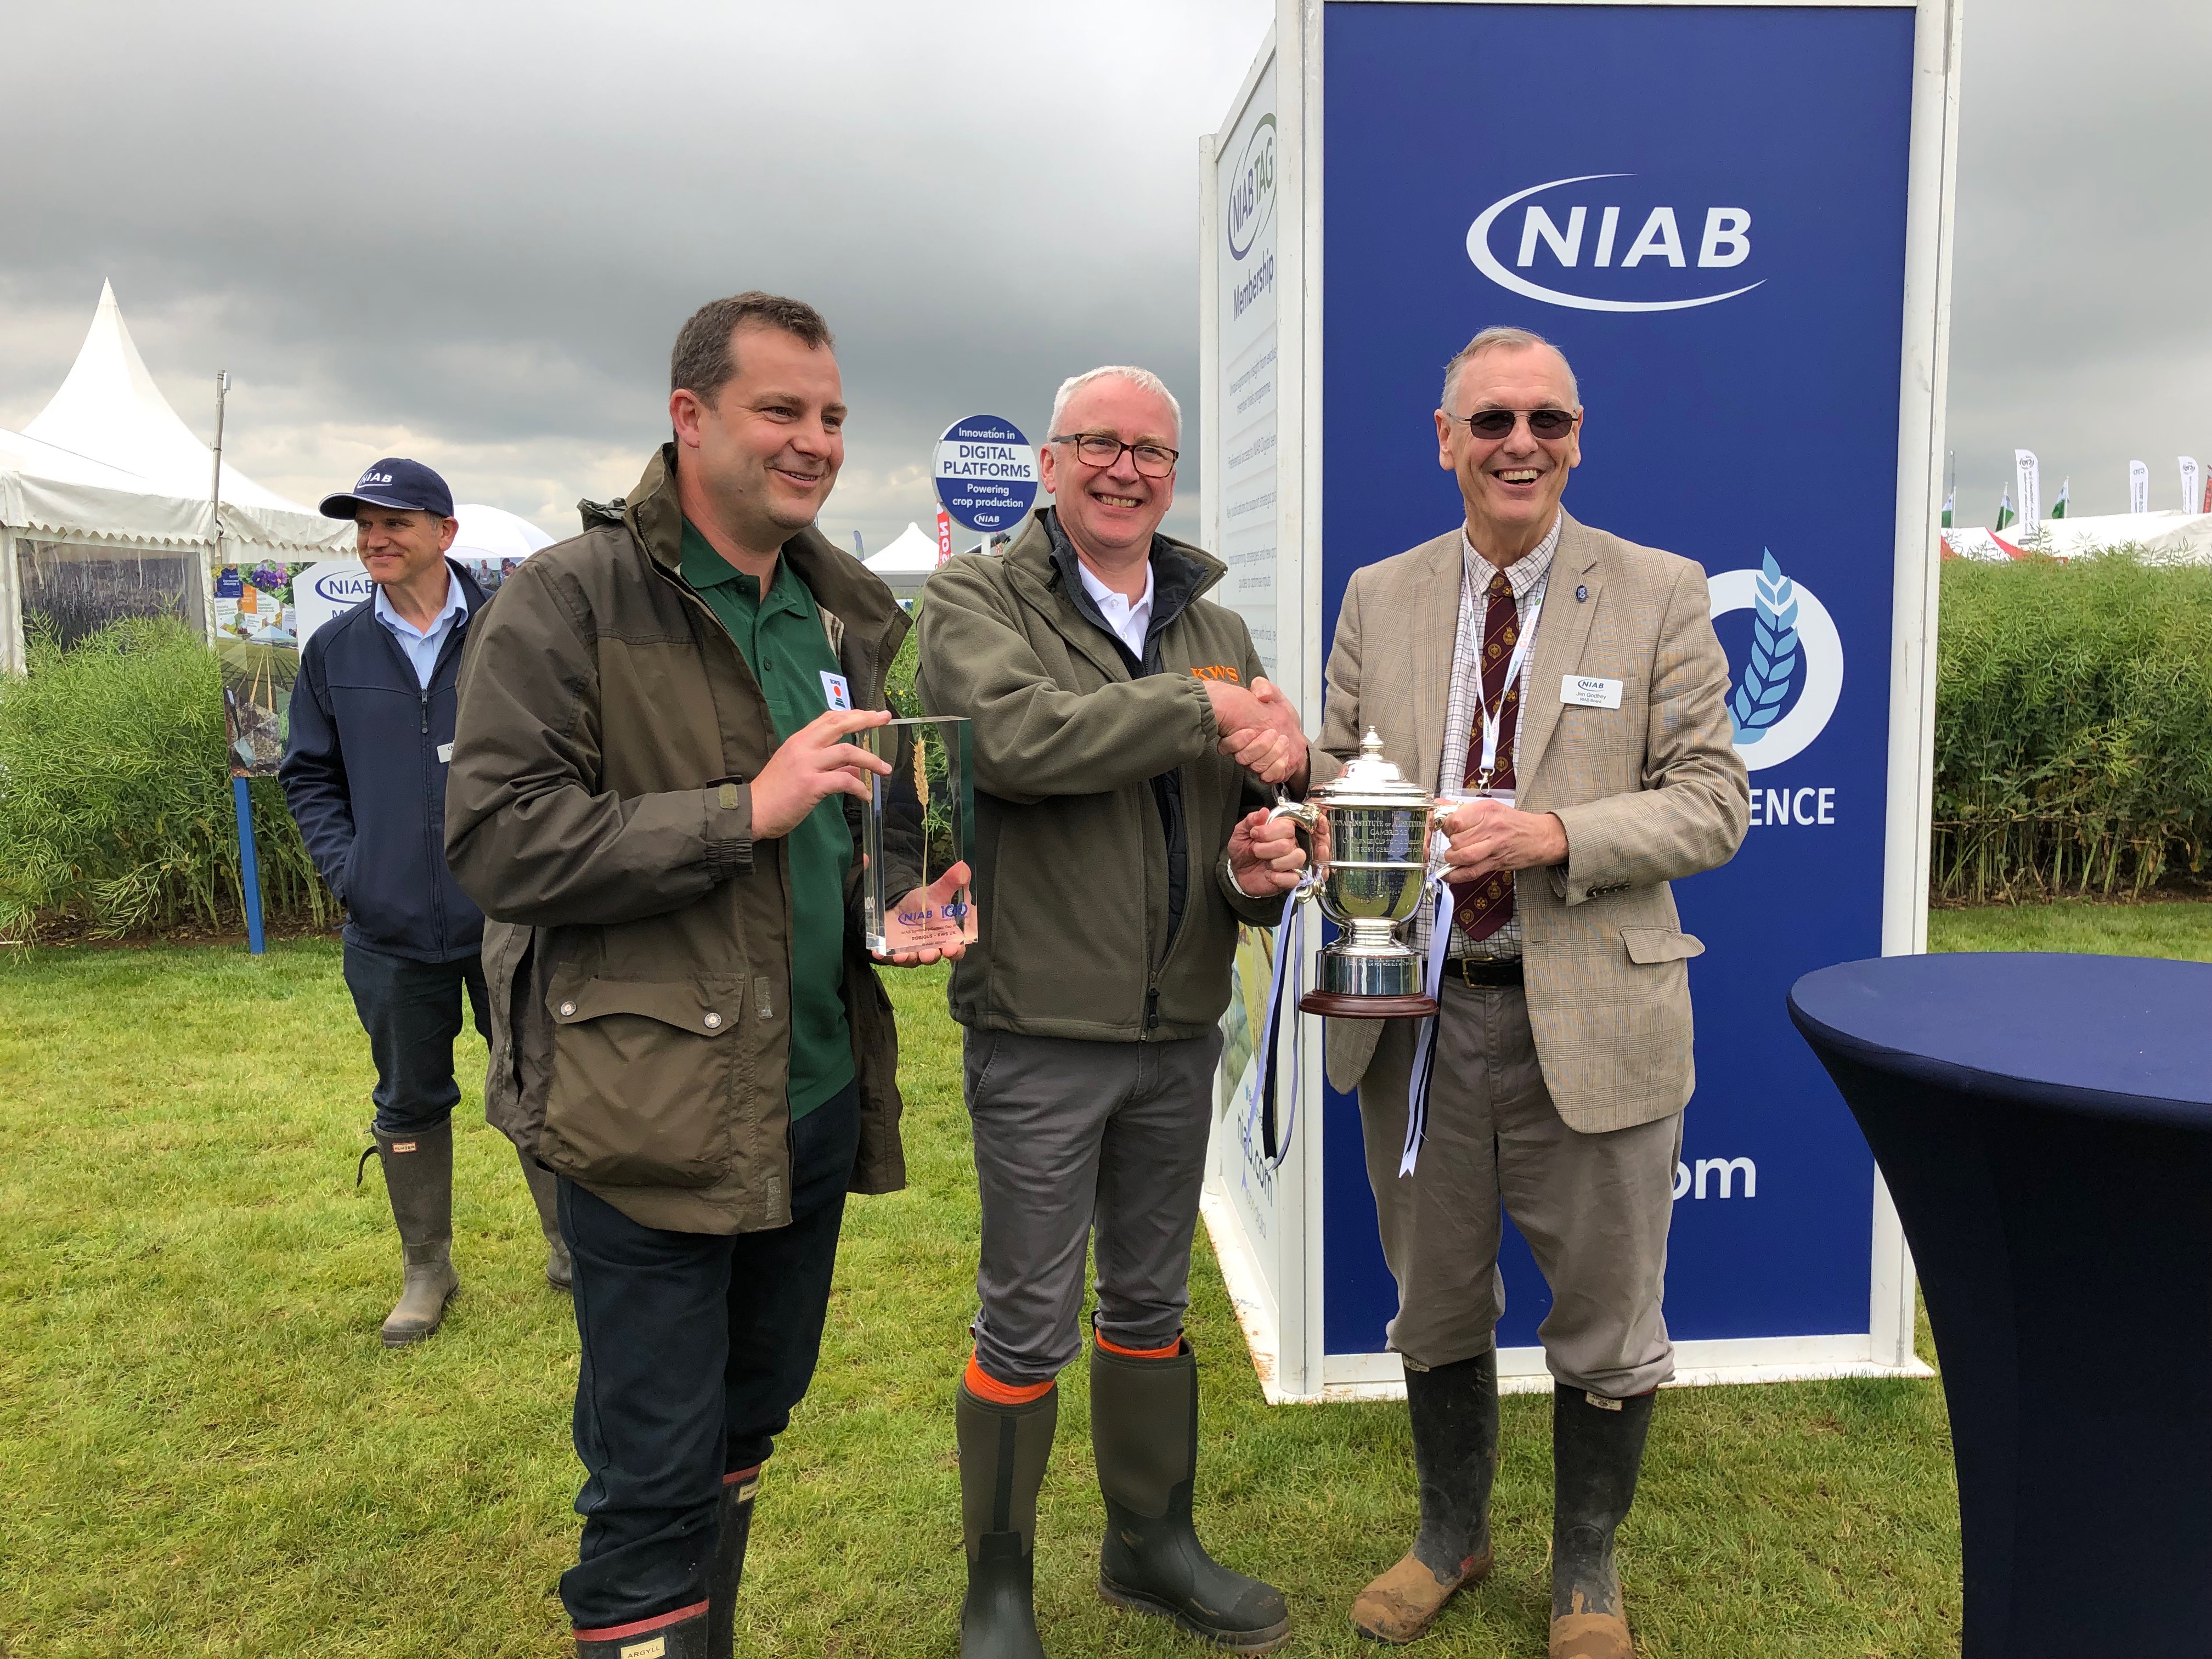 Mark-Dodds-and-Andrew-Newby-receive-the-NIAB-Cereals-Cup-from-NIAB-director-Jim-Godfrey.jpeg